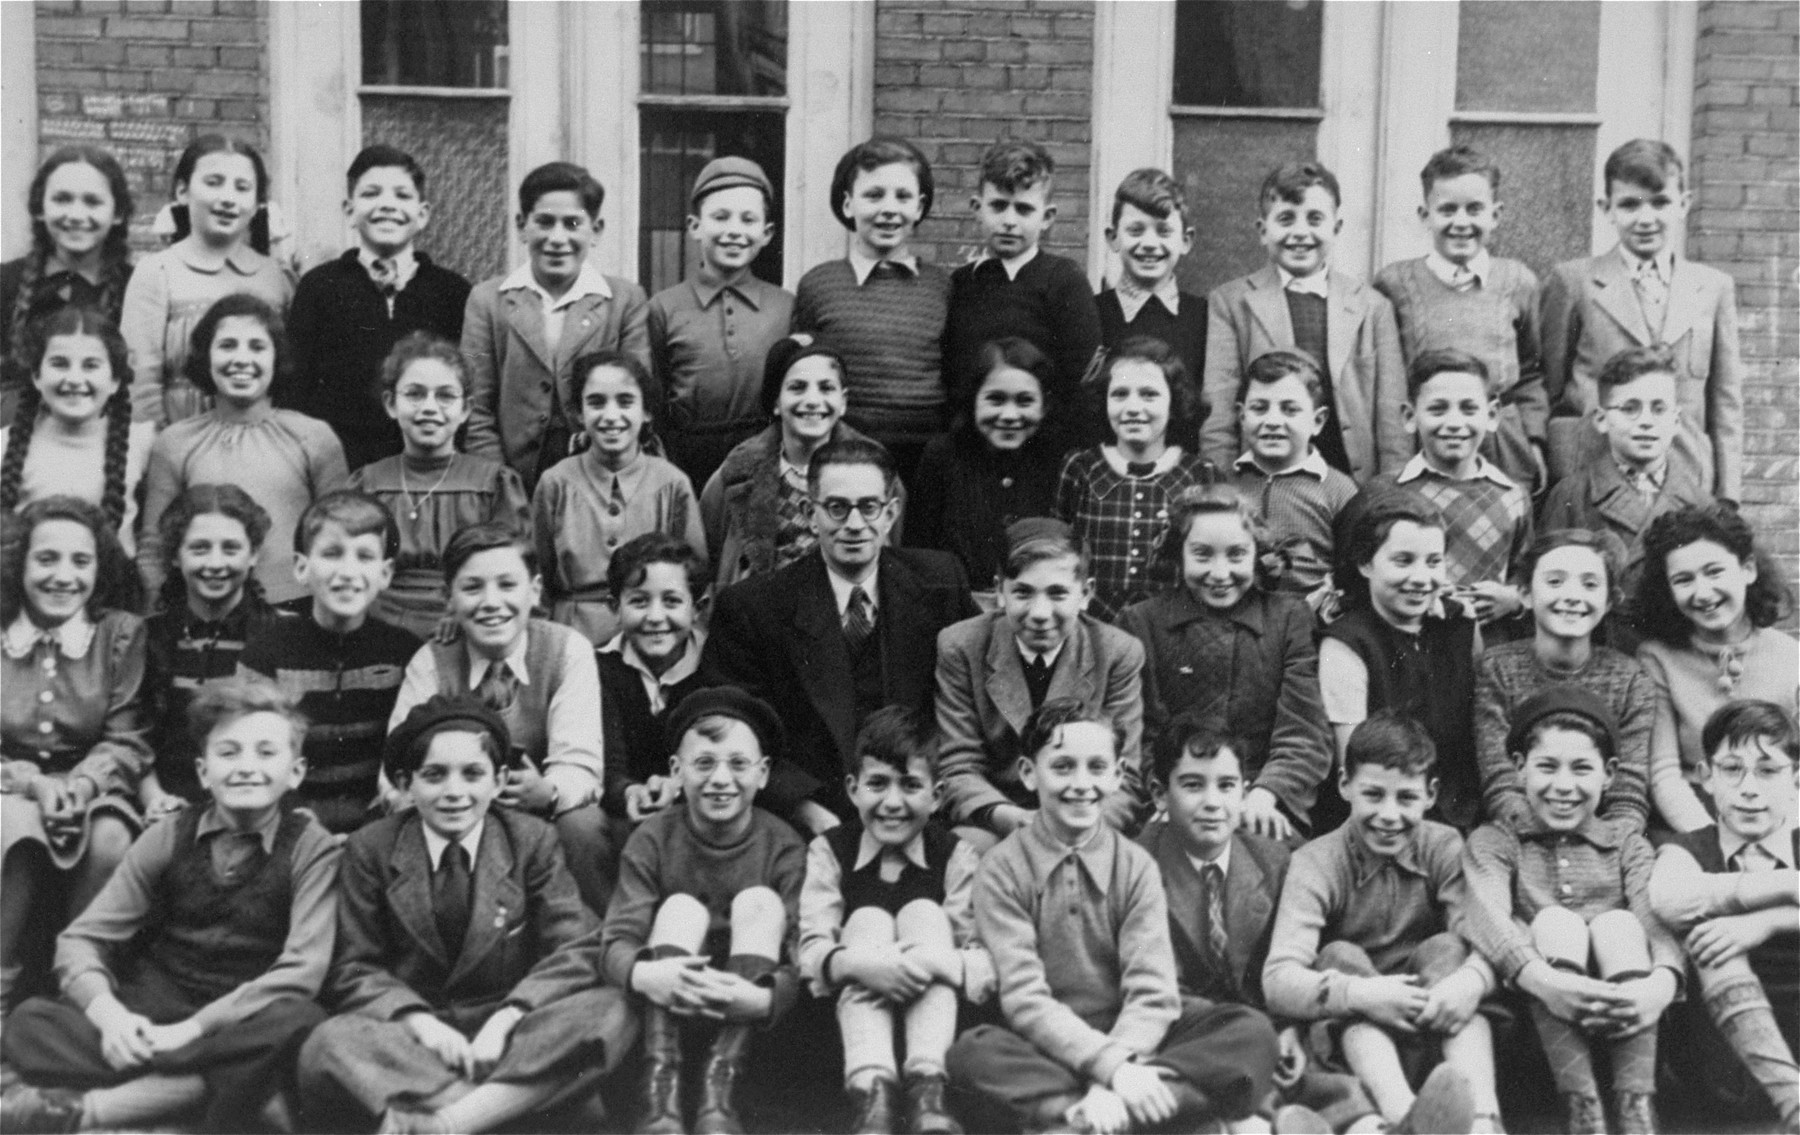 Third grade class at Rosh Pina Hebrew Day School where Marion Kaufmann was a student.  

She is last on the right in the second row from the bottom.  Most of these children left by Kinder Aliyah to Israel.